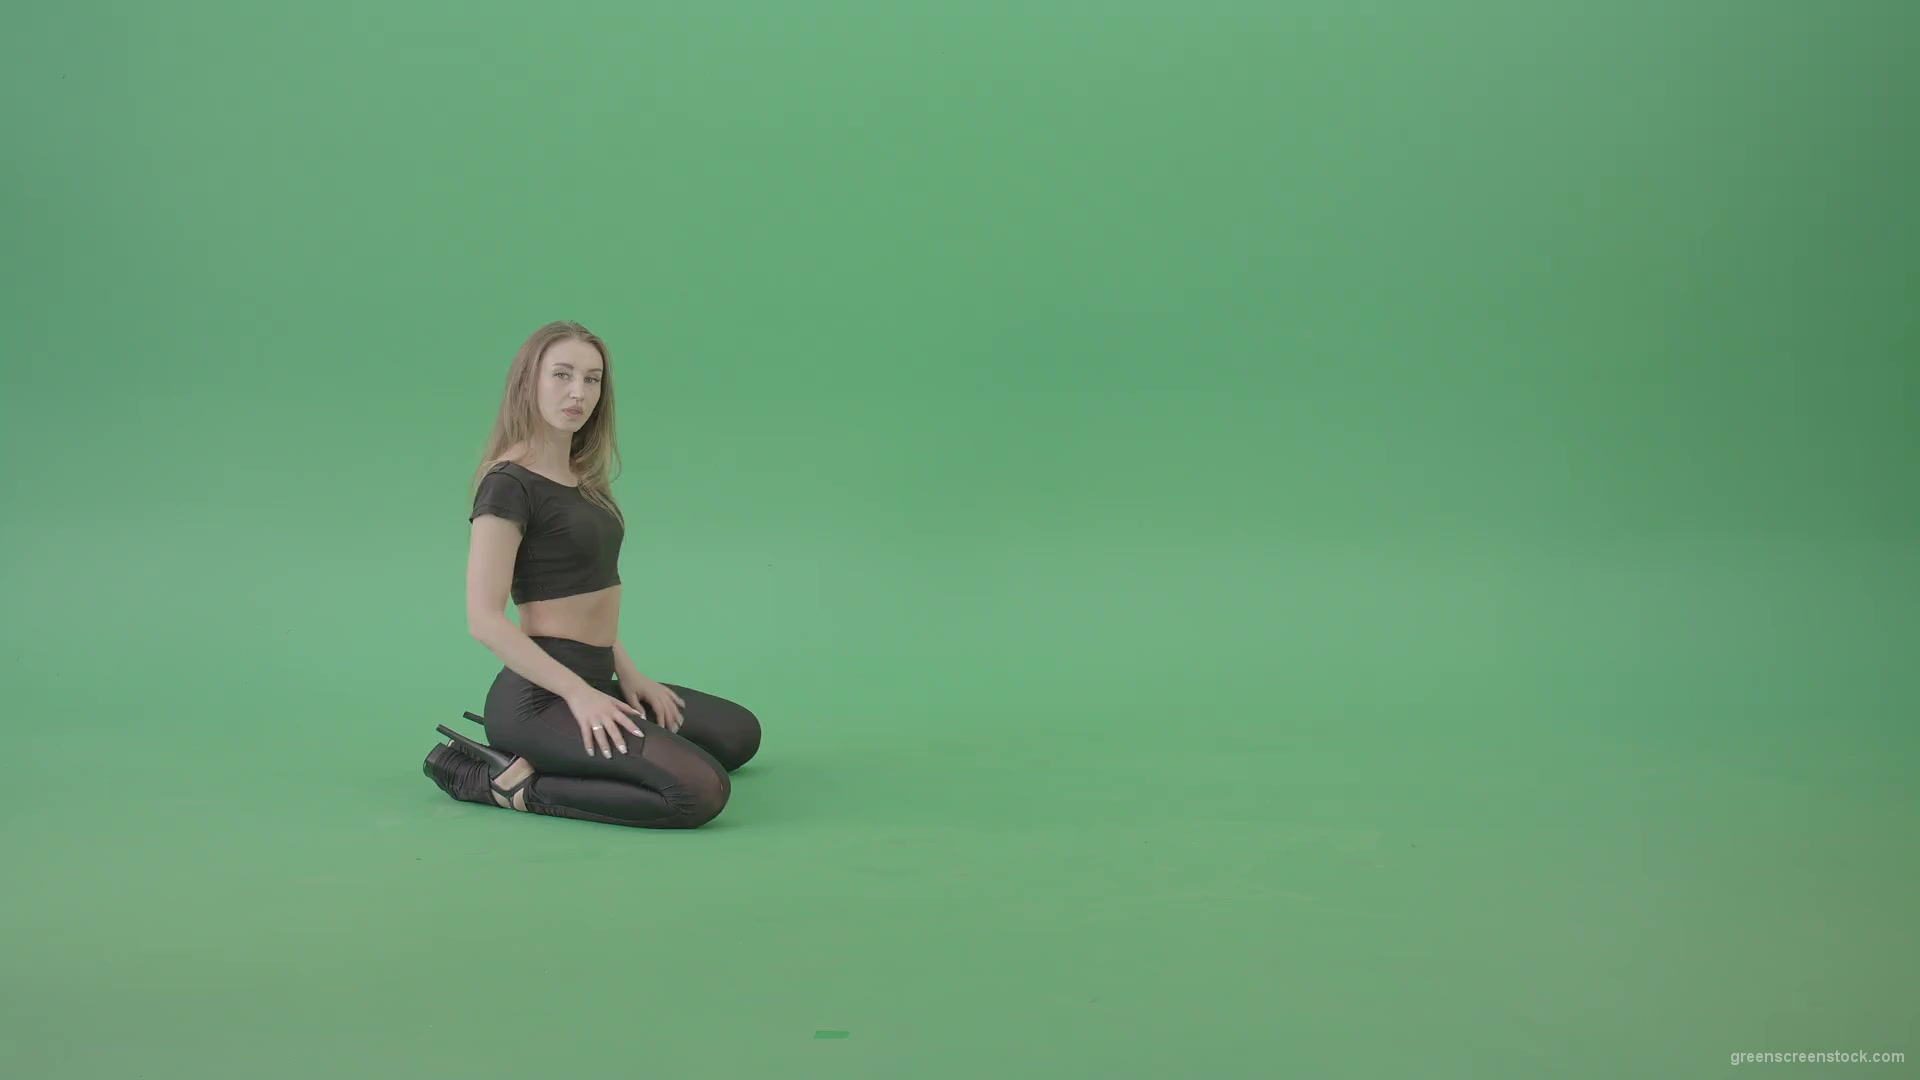 Sexy-Dancing-Girl-showing-Exotic-erotic-dance-isolated-on-green-screen-4K-Video-Footage-1920_001 Green Screen Stock